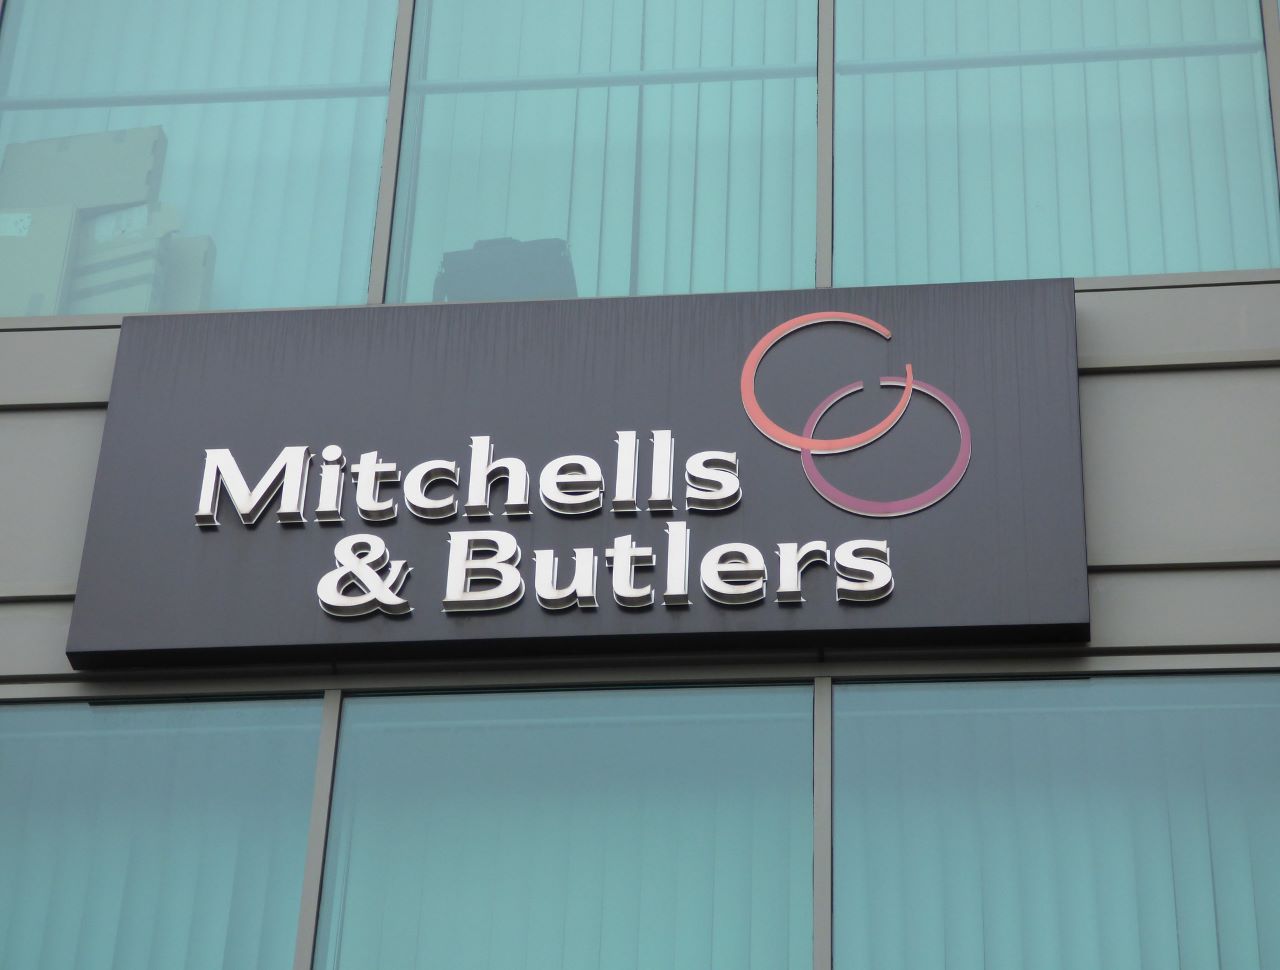 Mitchells & Butlers sales rise despite worries over rising costs